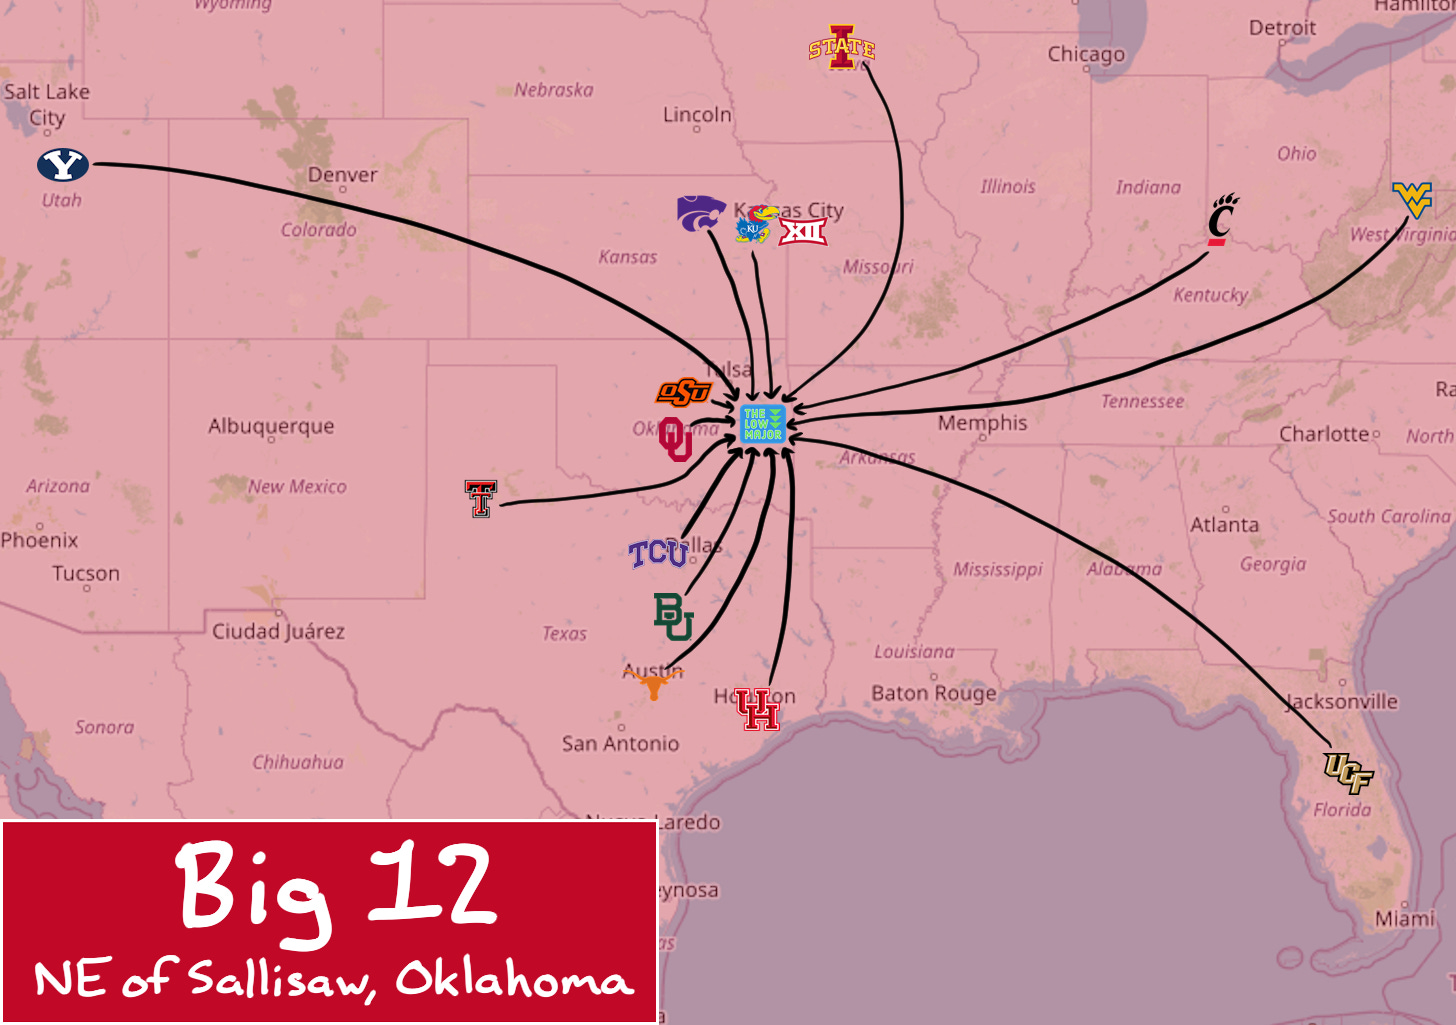 Big 12 midpoint map